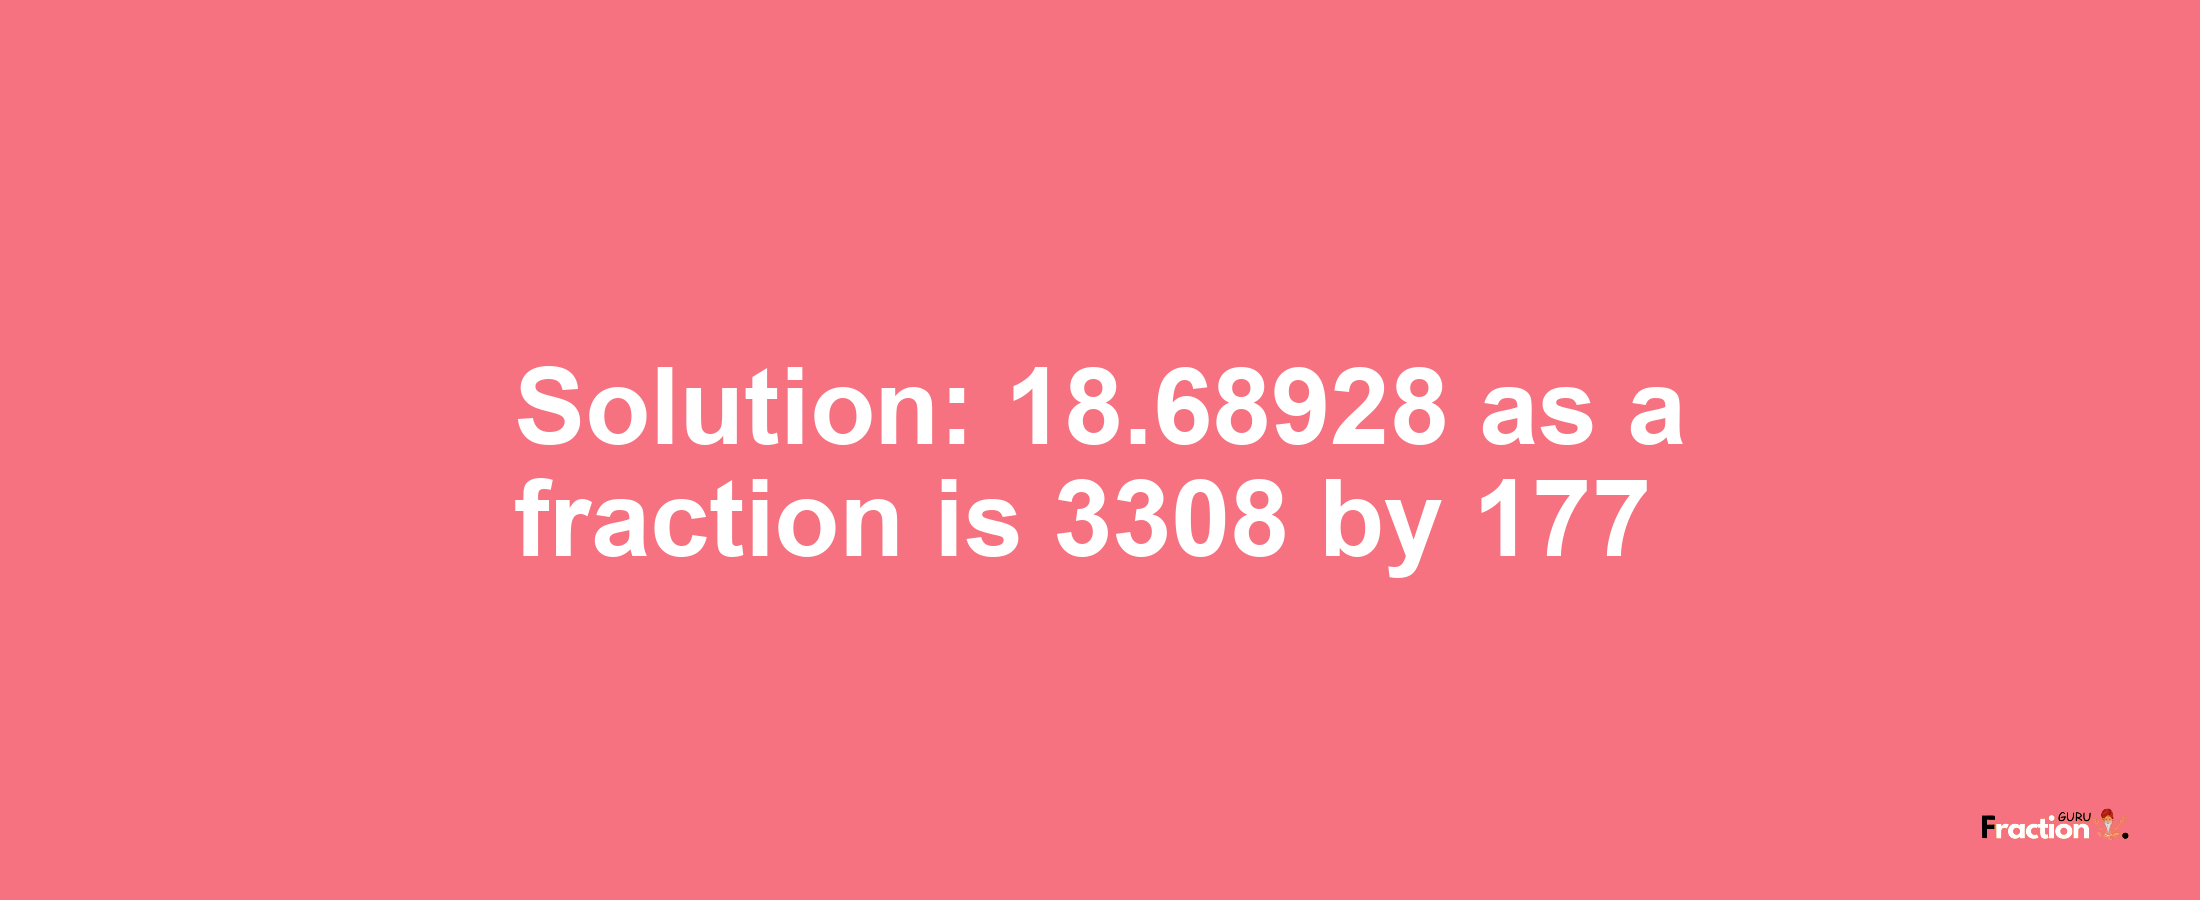 Solution:18.68928 as a fraction is 3308/177